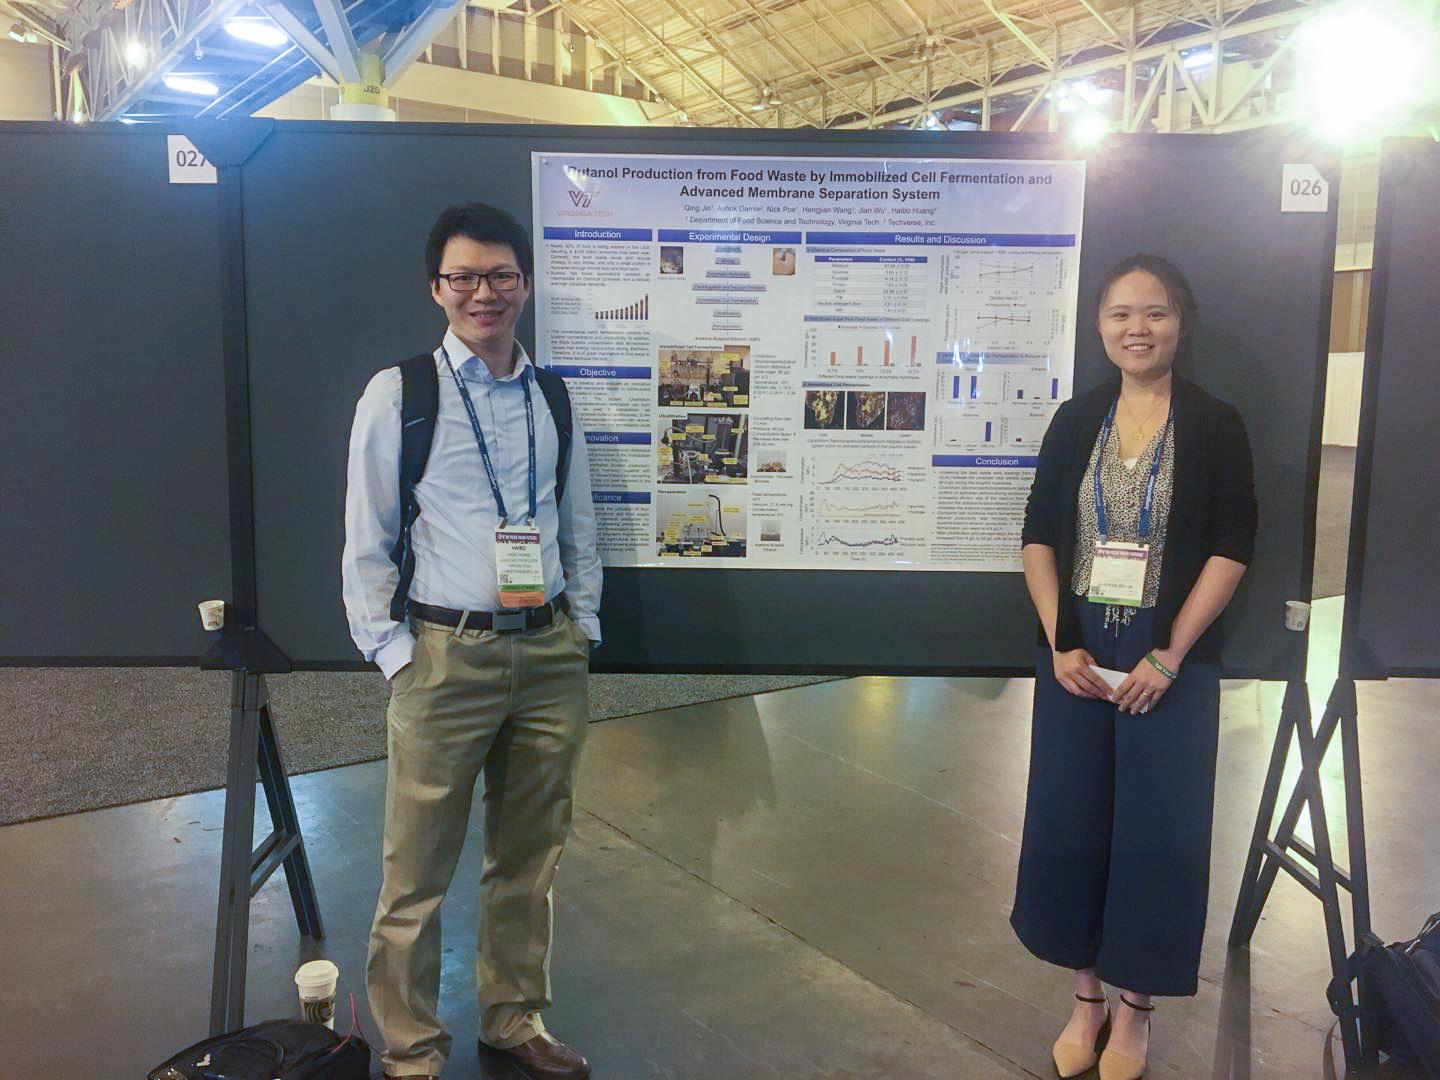 Dr. Haibo Huang and Qing Jin stand in front of their poster at a conference